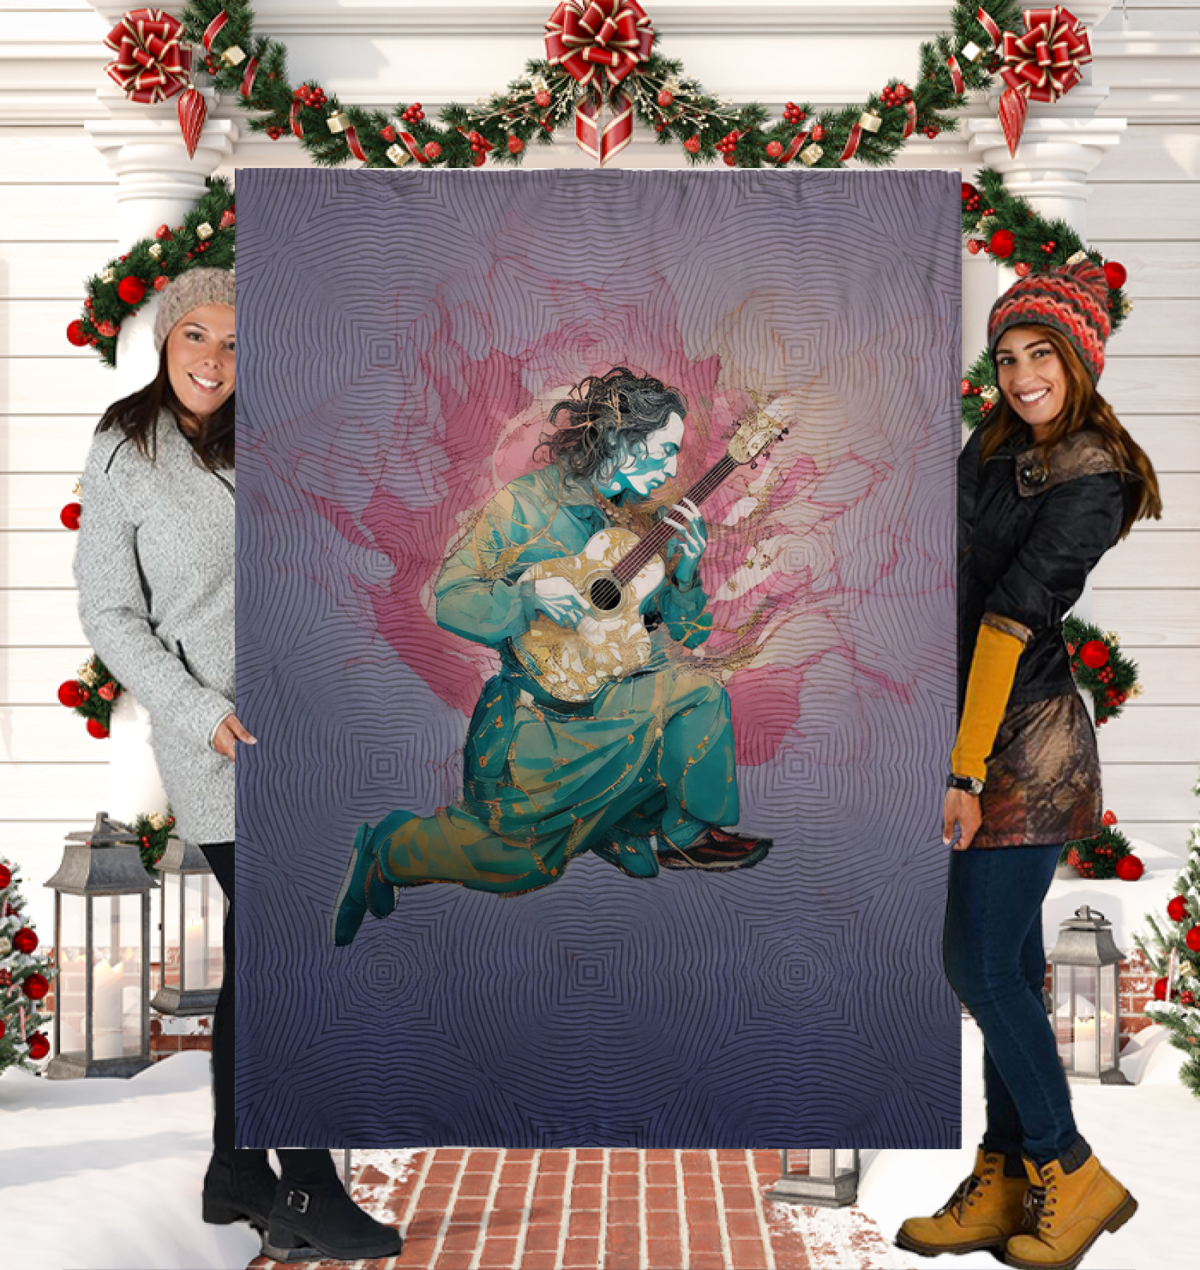 Artistic Meadow Symphony design on a Sherpa blanket.